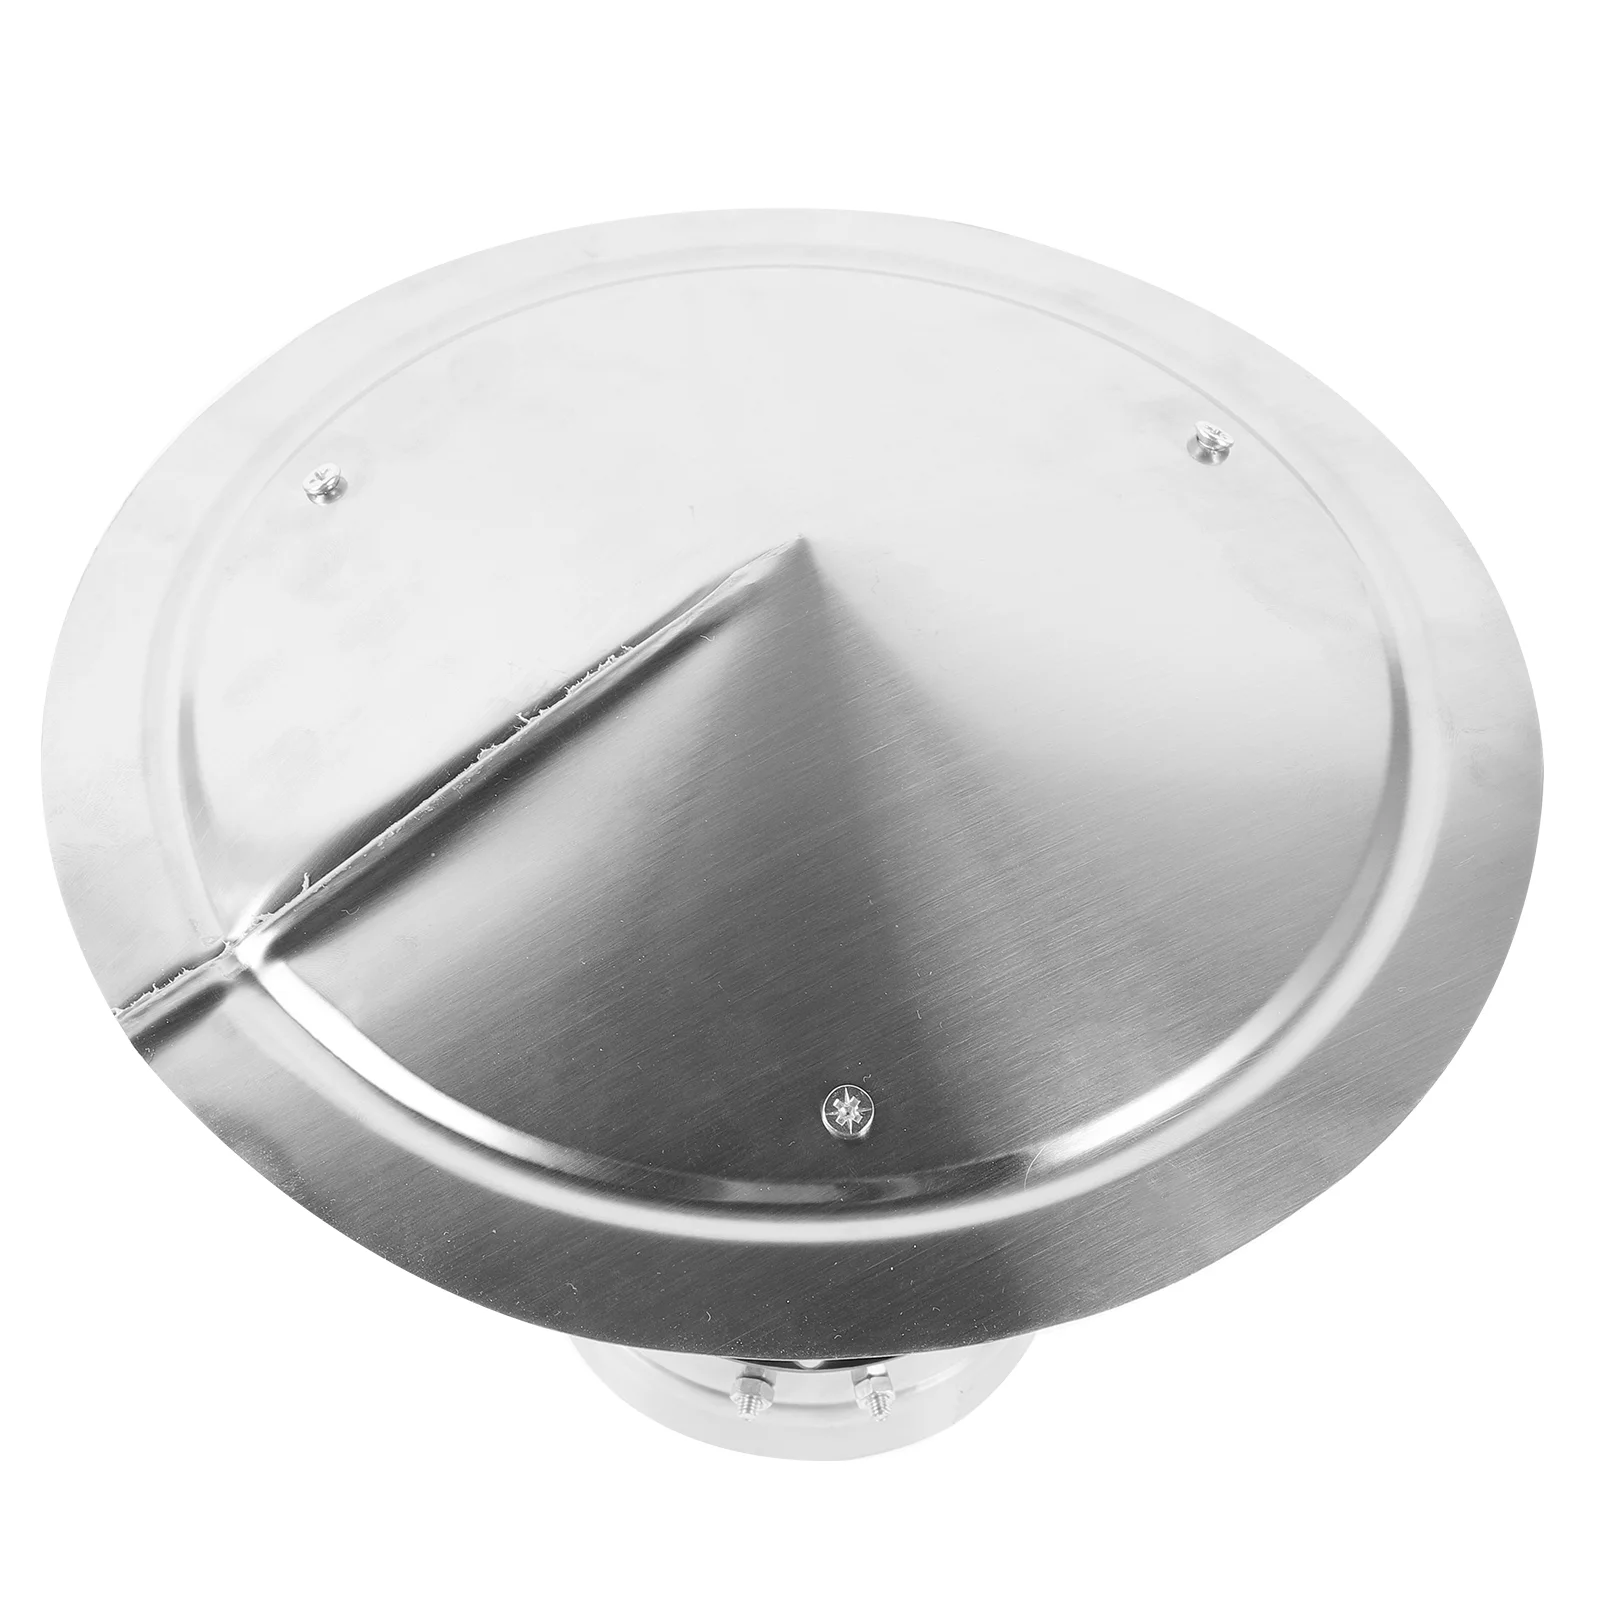 

Roof Vent Rain Cover Rain Cover Stainless Steel Windproof Cap Rain Protector Cap Chimney Flue Cover